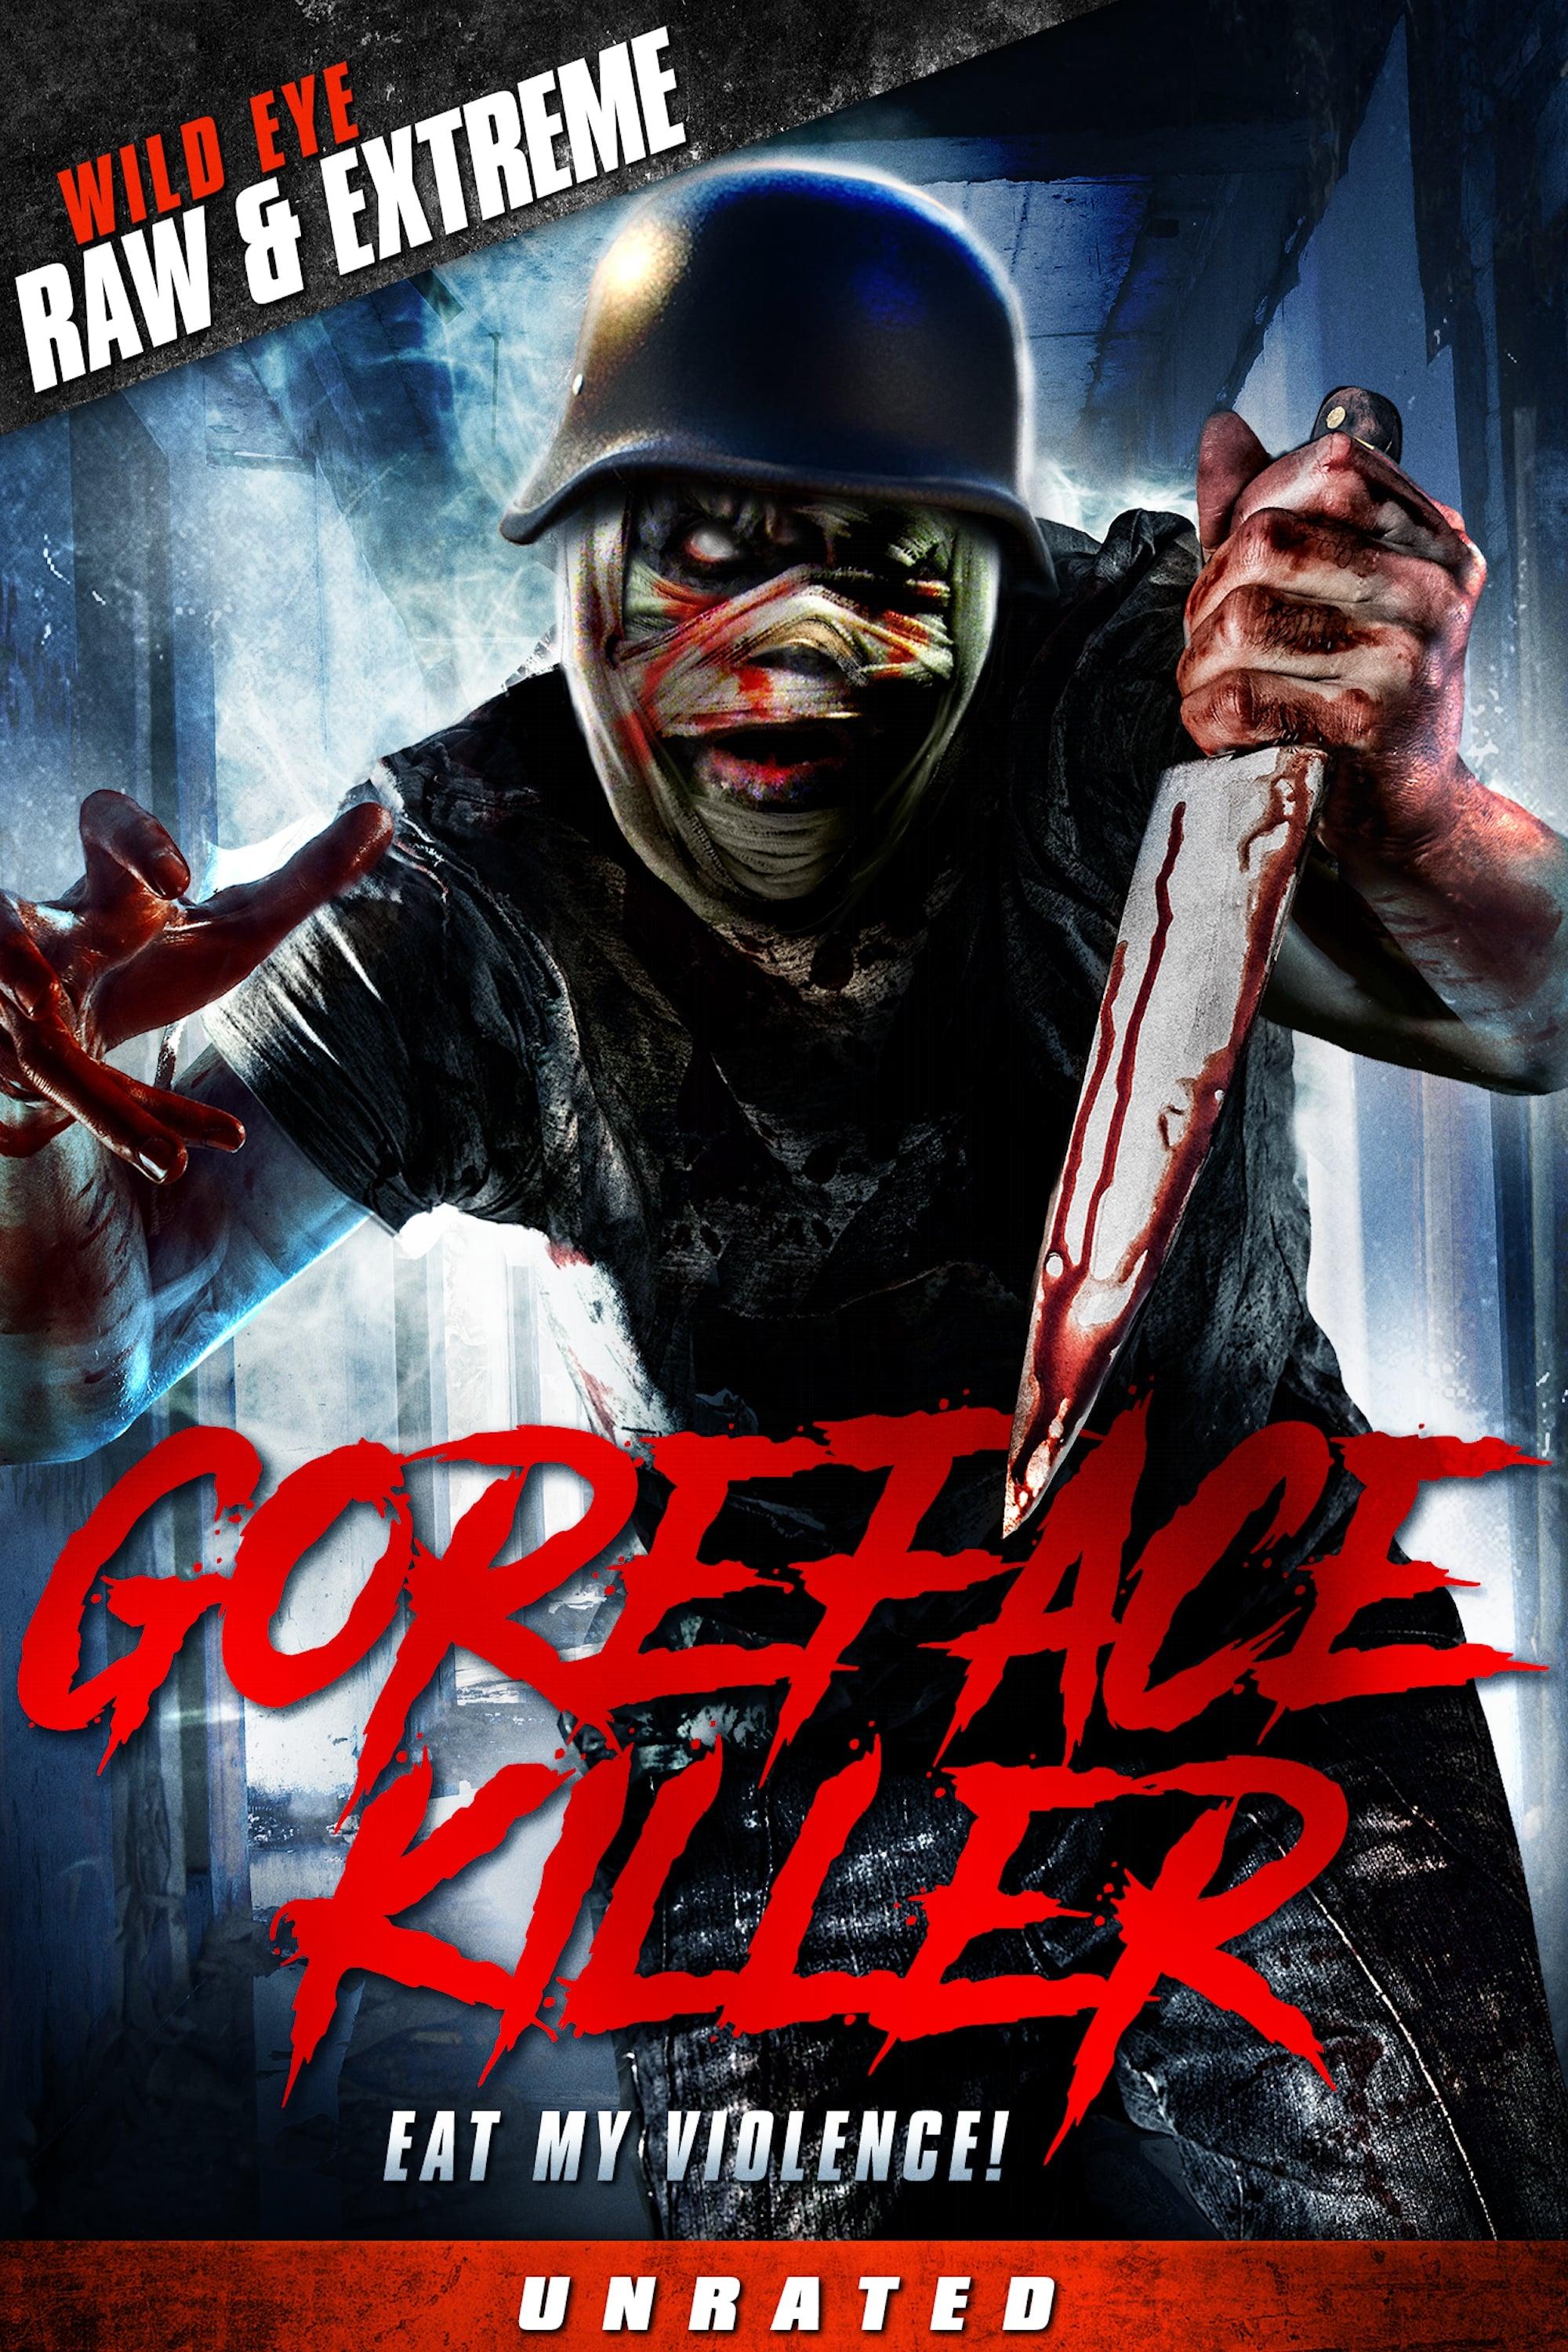 Attack of the Cockface Killer poster